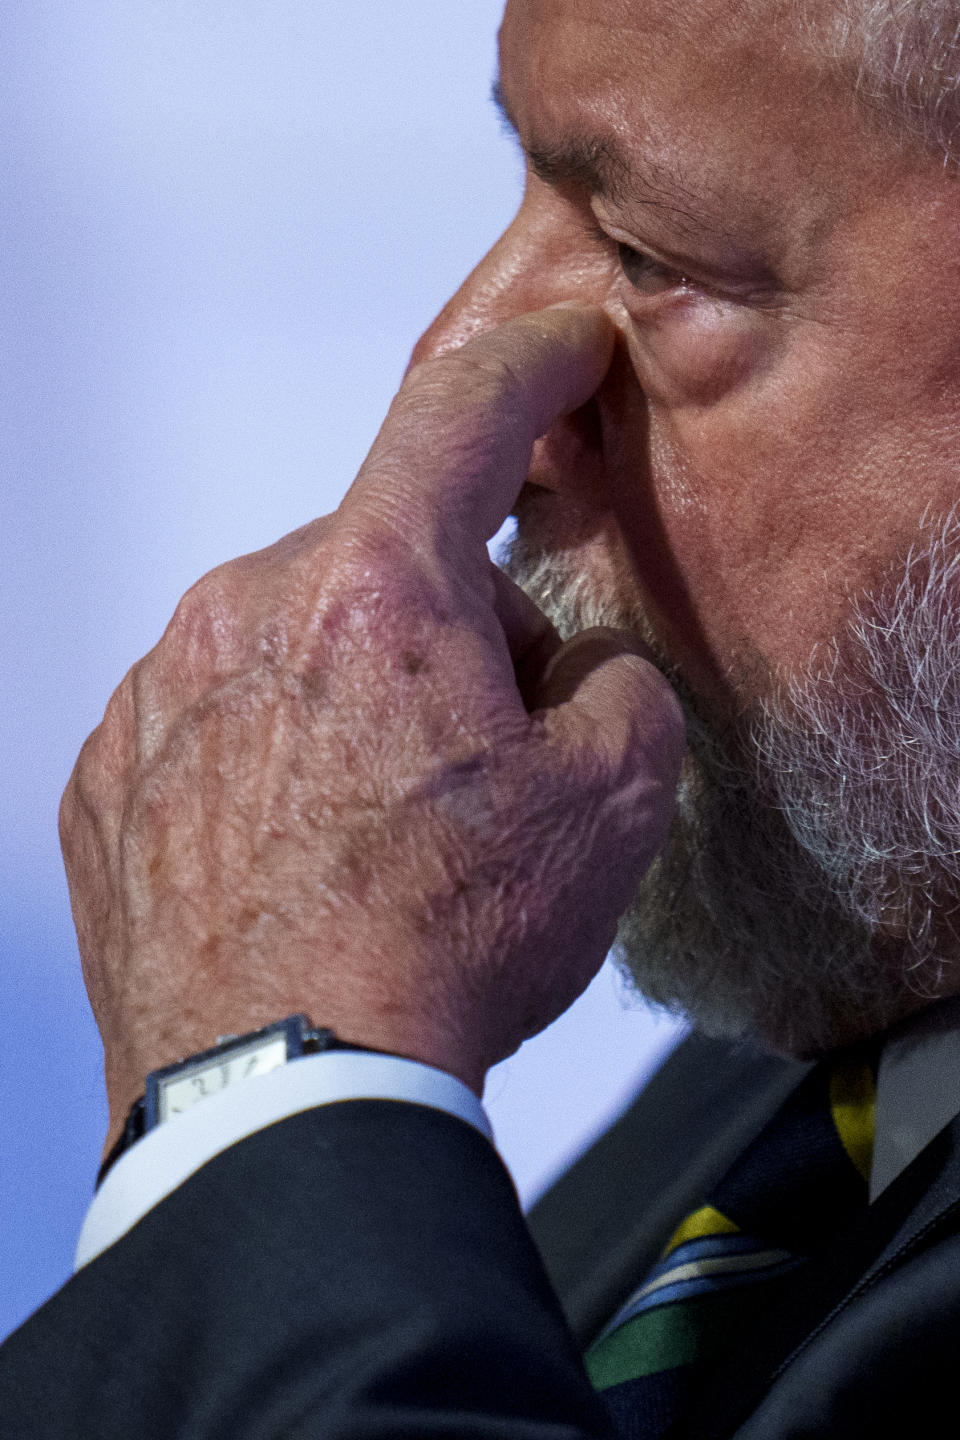 Brazilian President Luis Inacio Lula da Silva gestures during a business meeting at the Casa America in Madrid, Spain, Tuesday, April 25, 2023. Brazil's President Luiz Inácio Lula da Silva visits Spain on Tuesday on the second stop of a European tour aimed at resetting relations and making progress on a long-delayed trade deal between the EU and the Mercosur bloc of Argentina, Brazil, Paraguay and Uruguay. (AP Photo/Manu Fernandez)